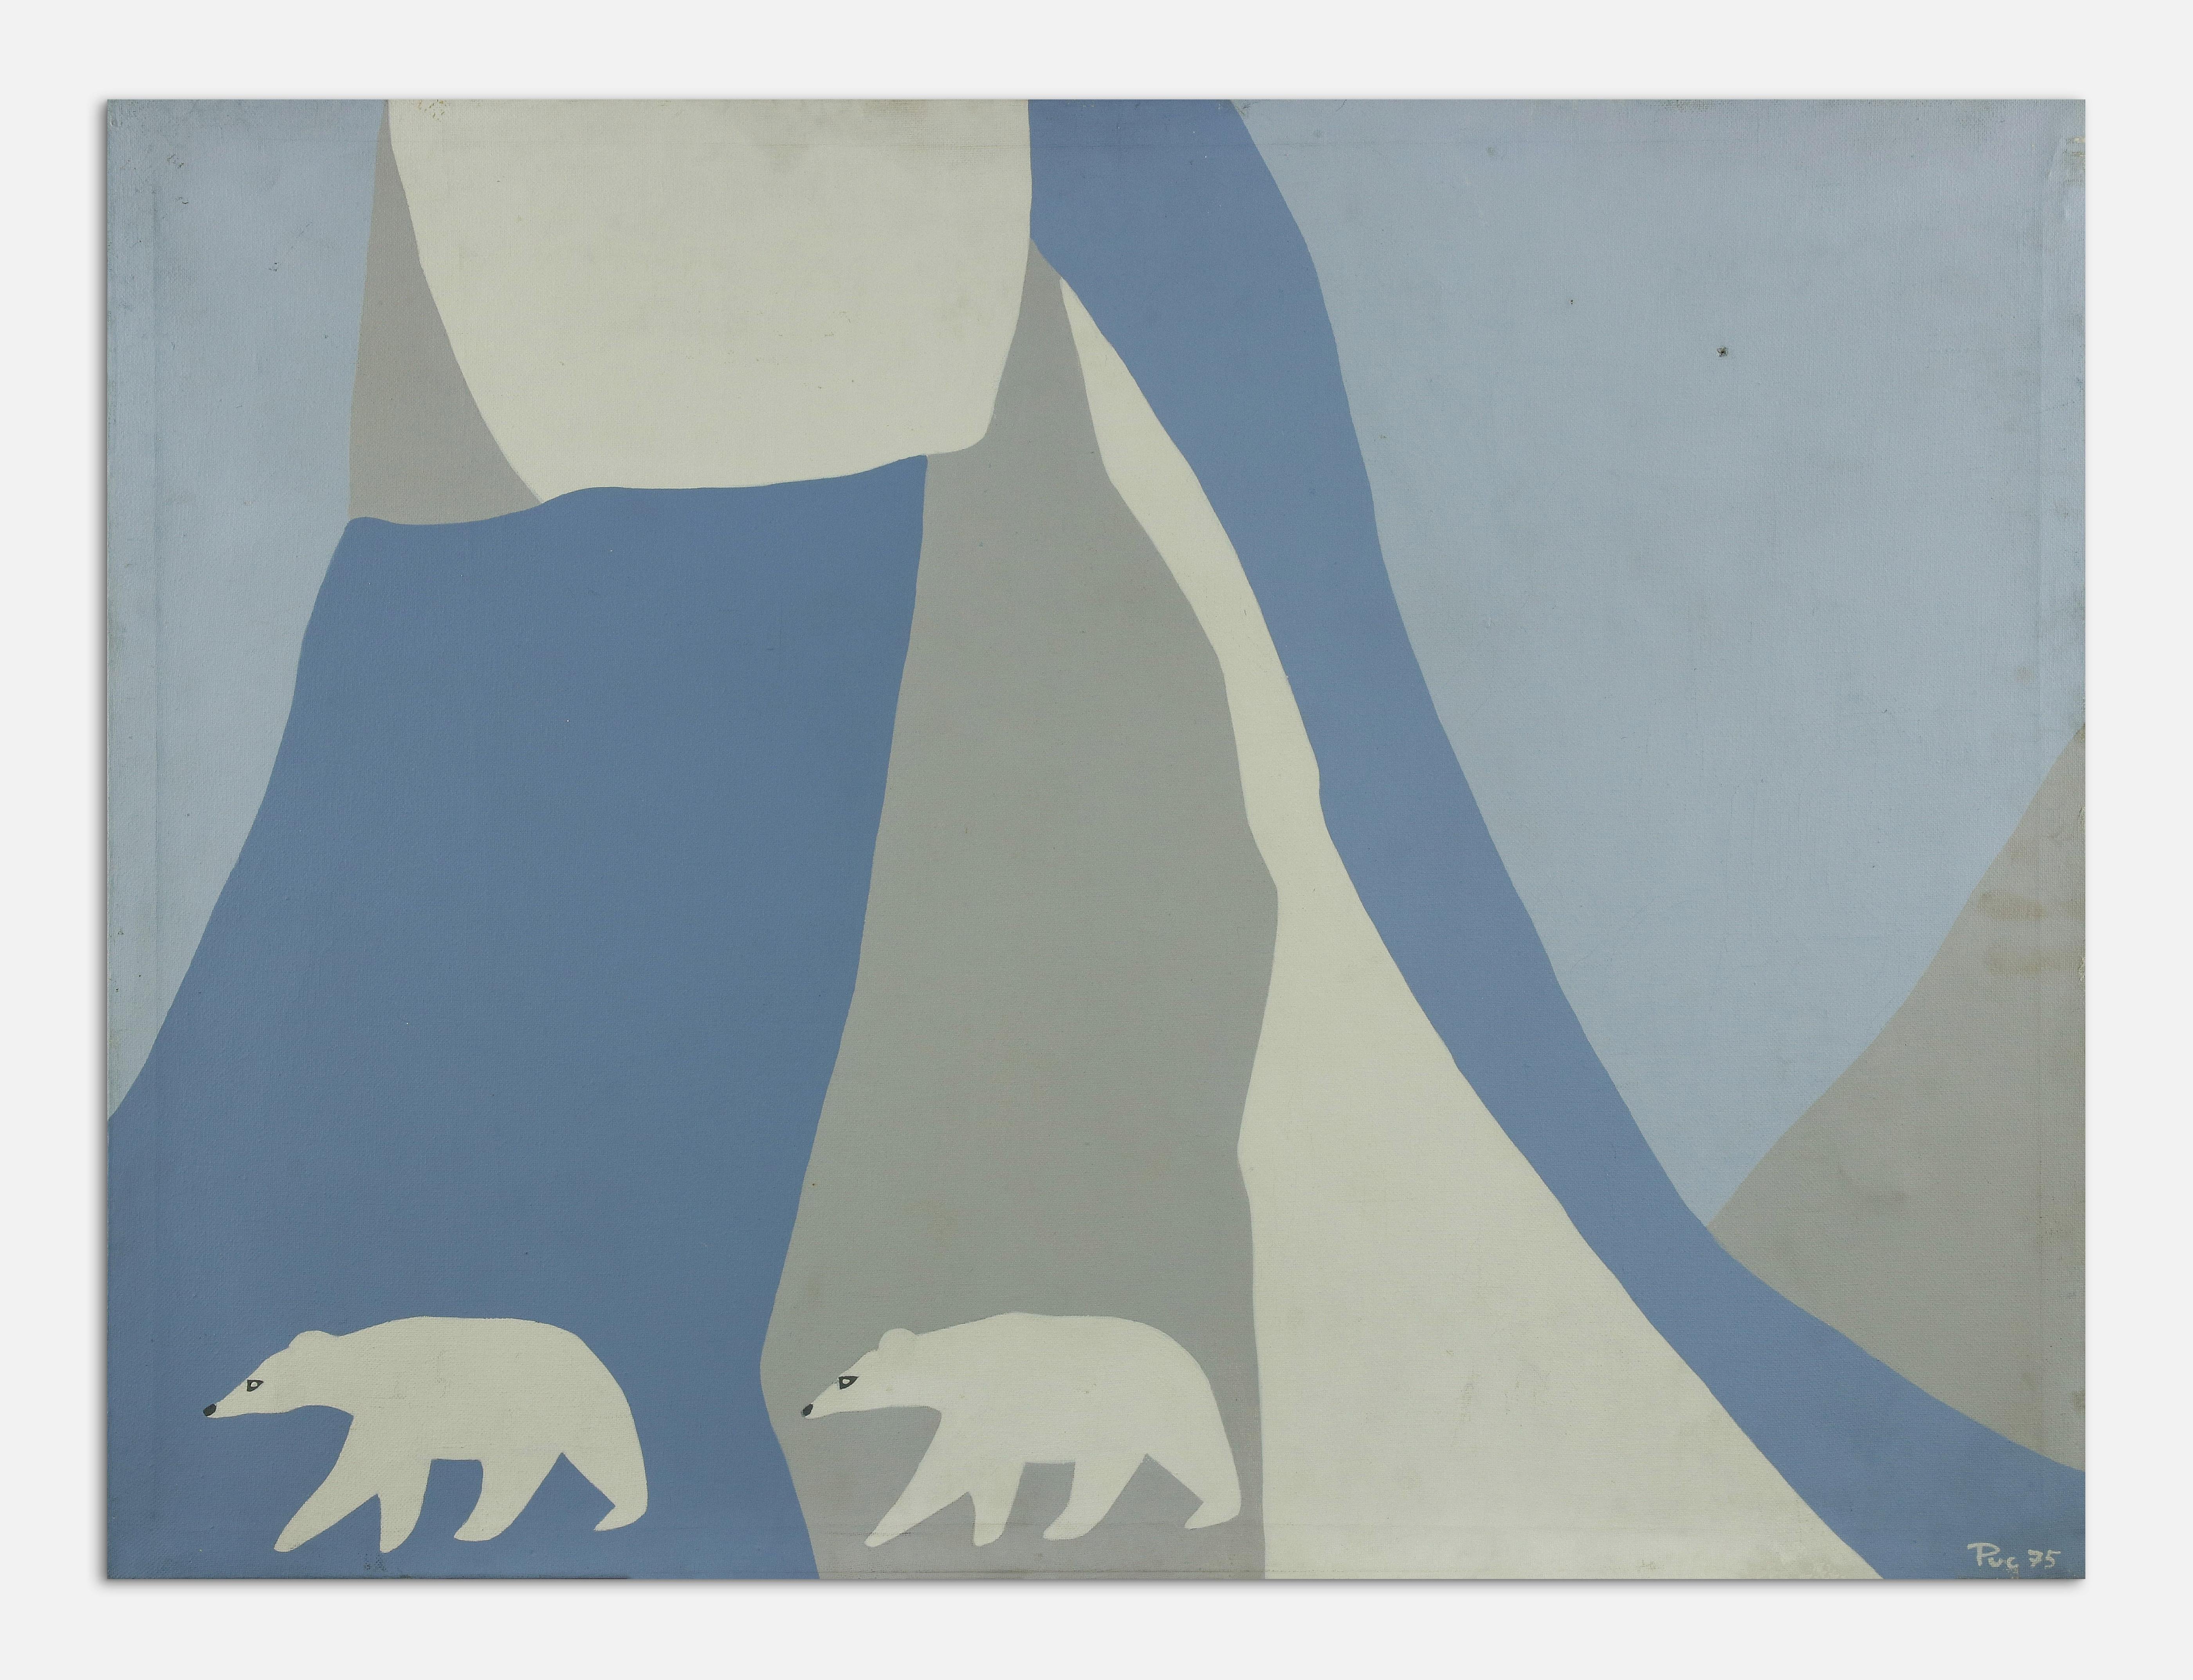 Unknown Abstract Painting - Light Blue and White Surface with Bears - Acrylic on Canvas by G. Puccini - 1975